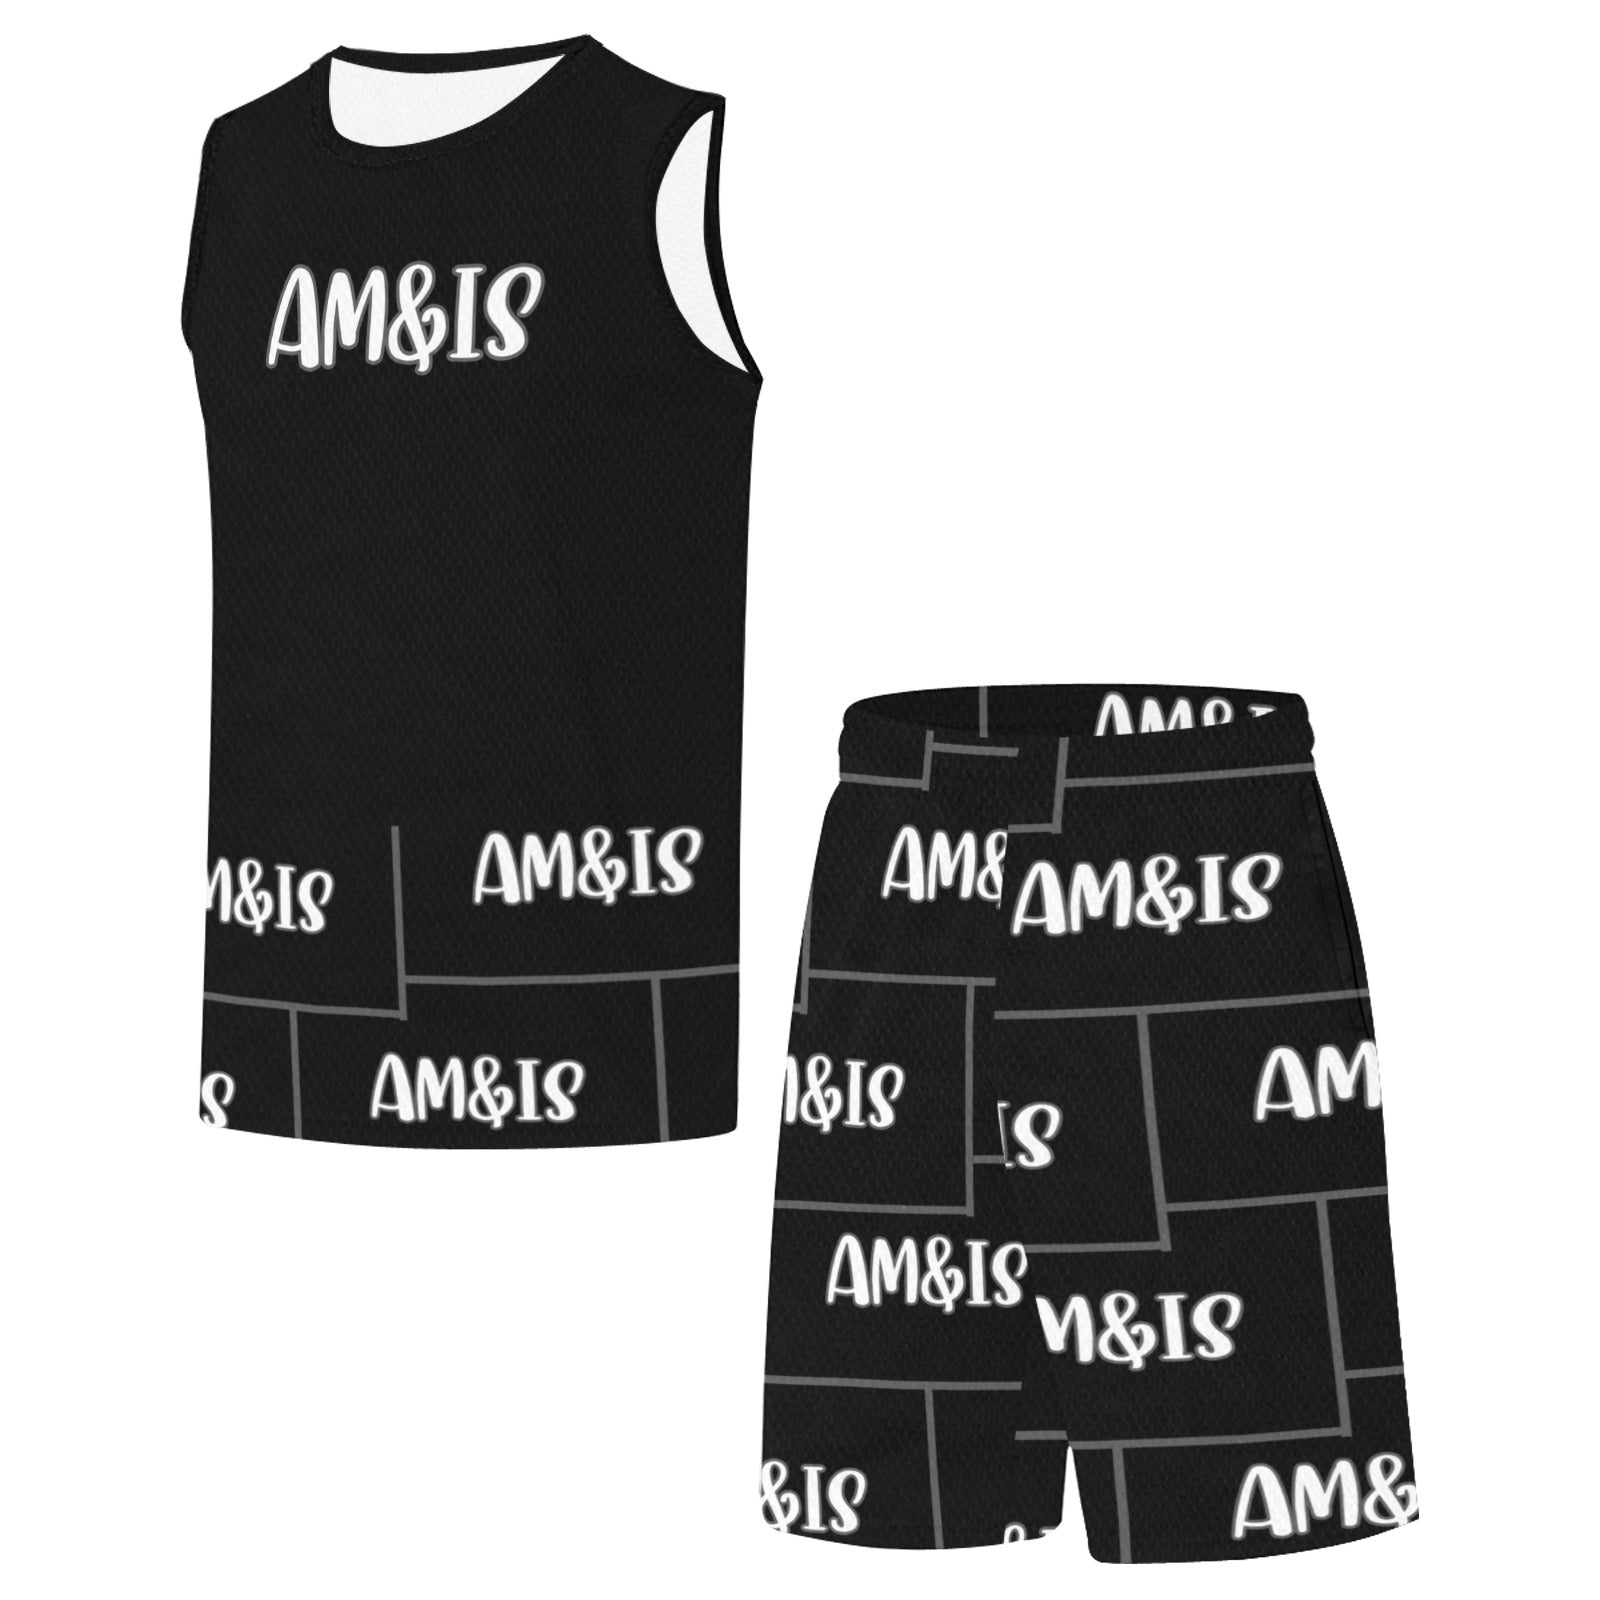 - AM&IS Basketball Uniform with Pocket - Basketball Uniform with Pocket at TFC&H Co.